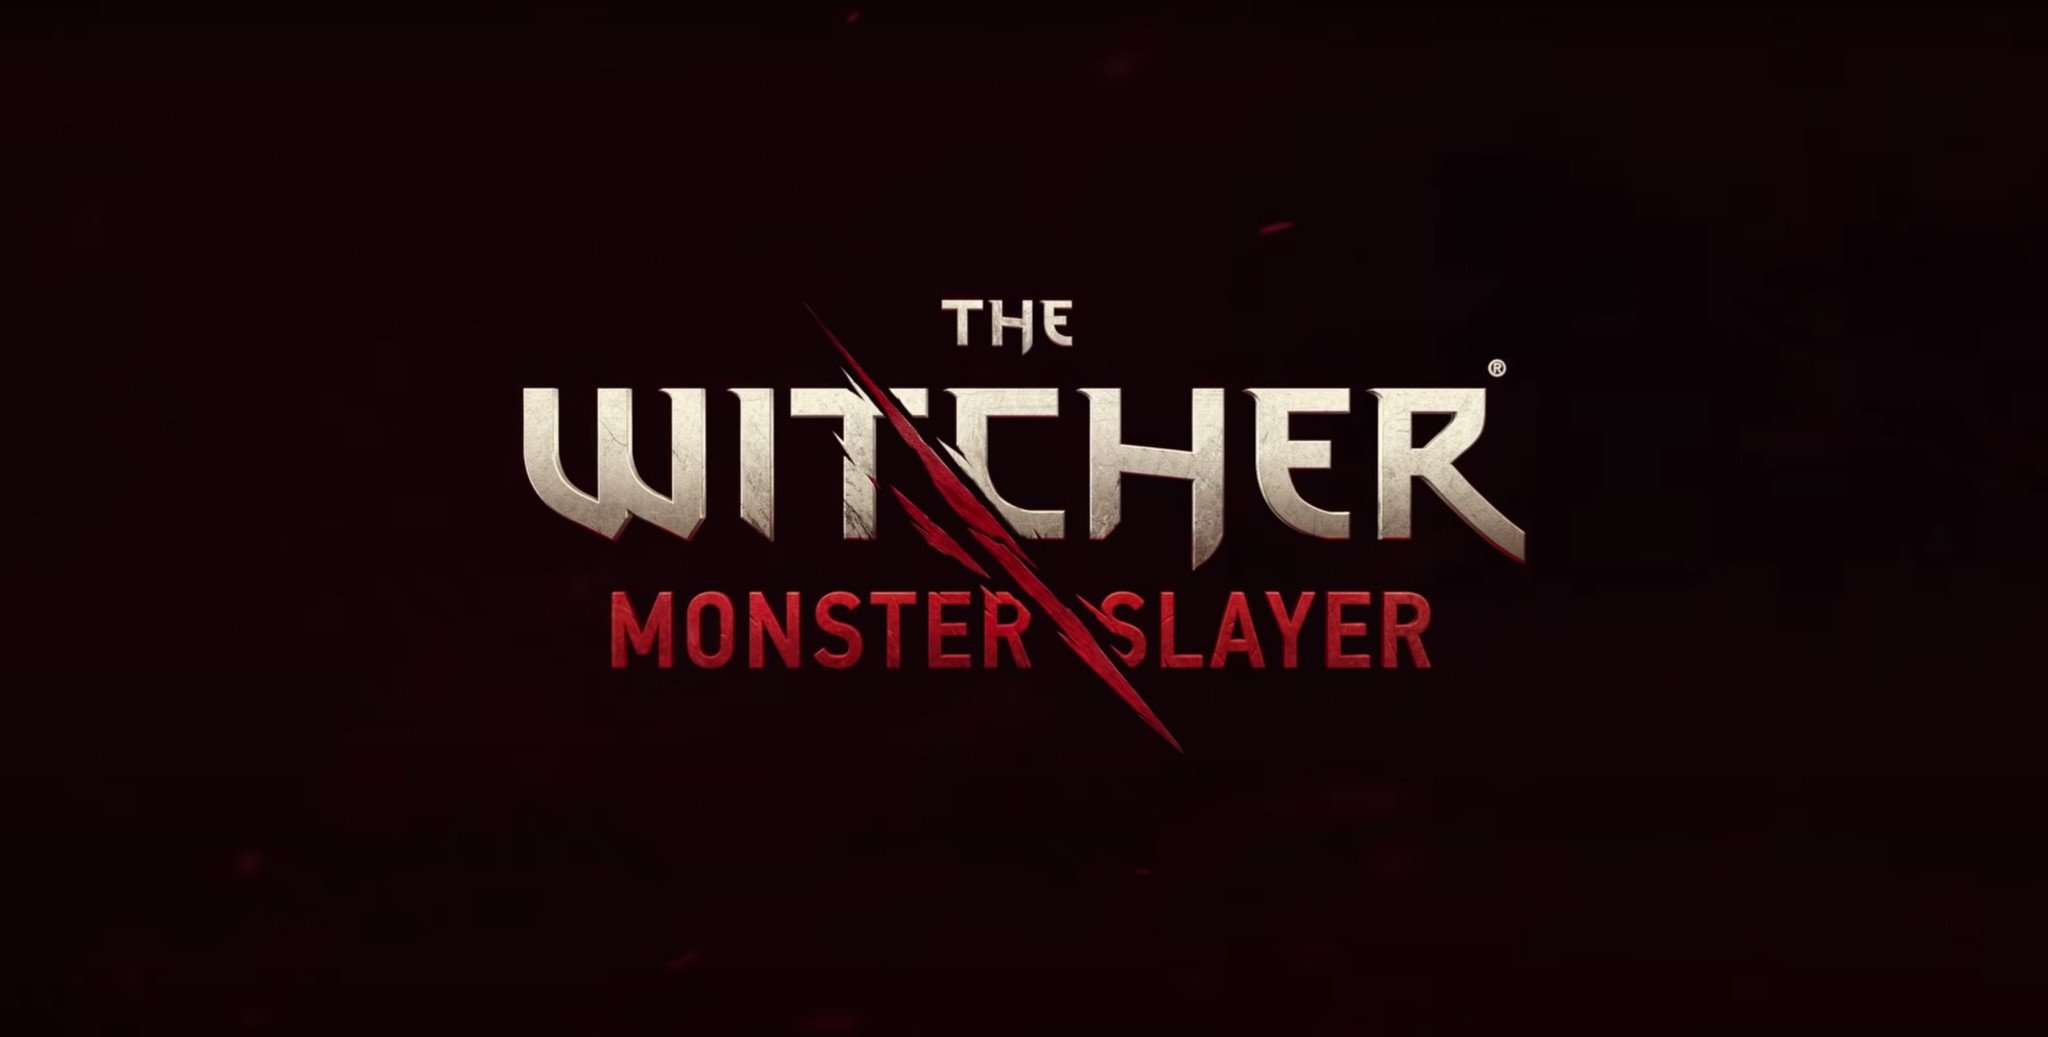 The Witcher Monster Slayer Image